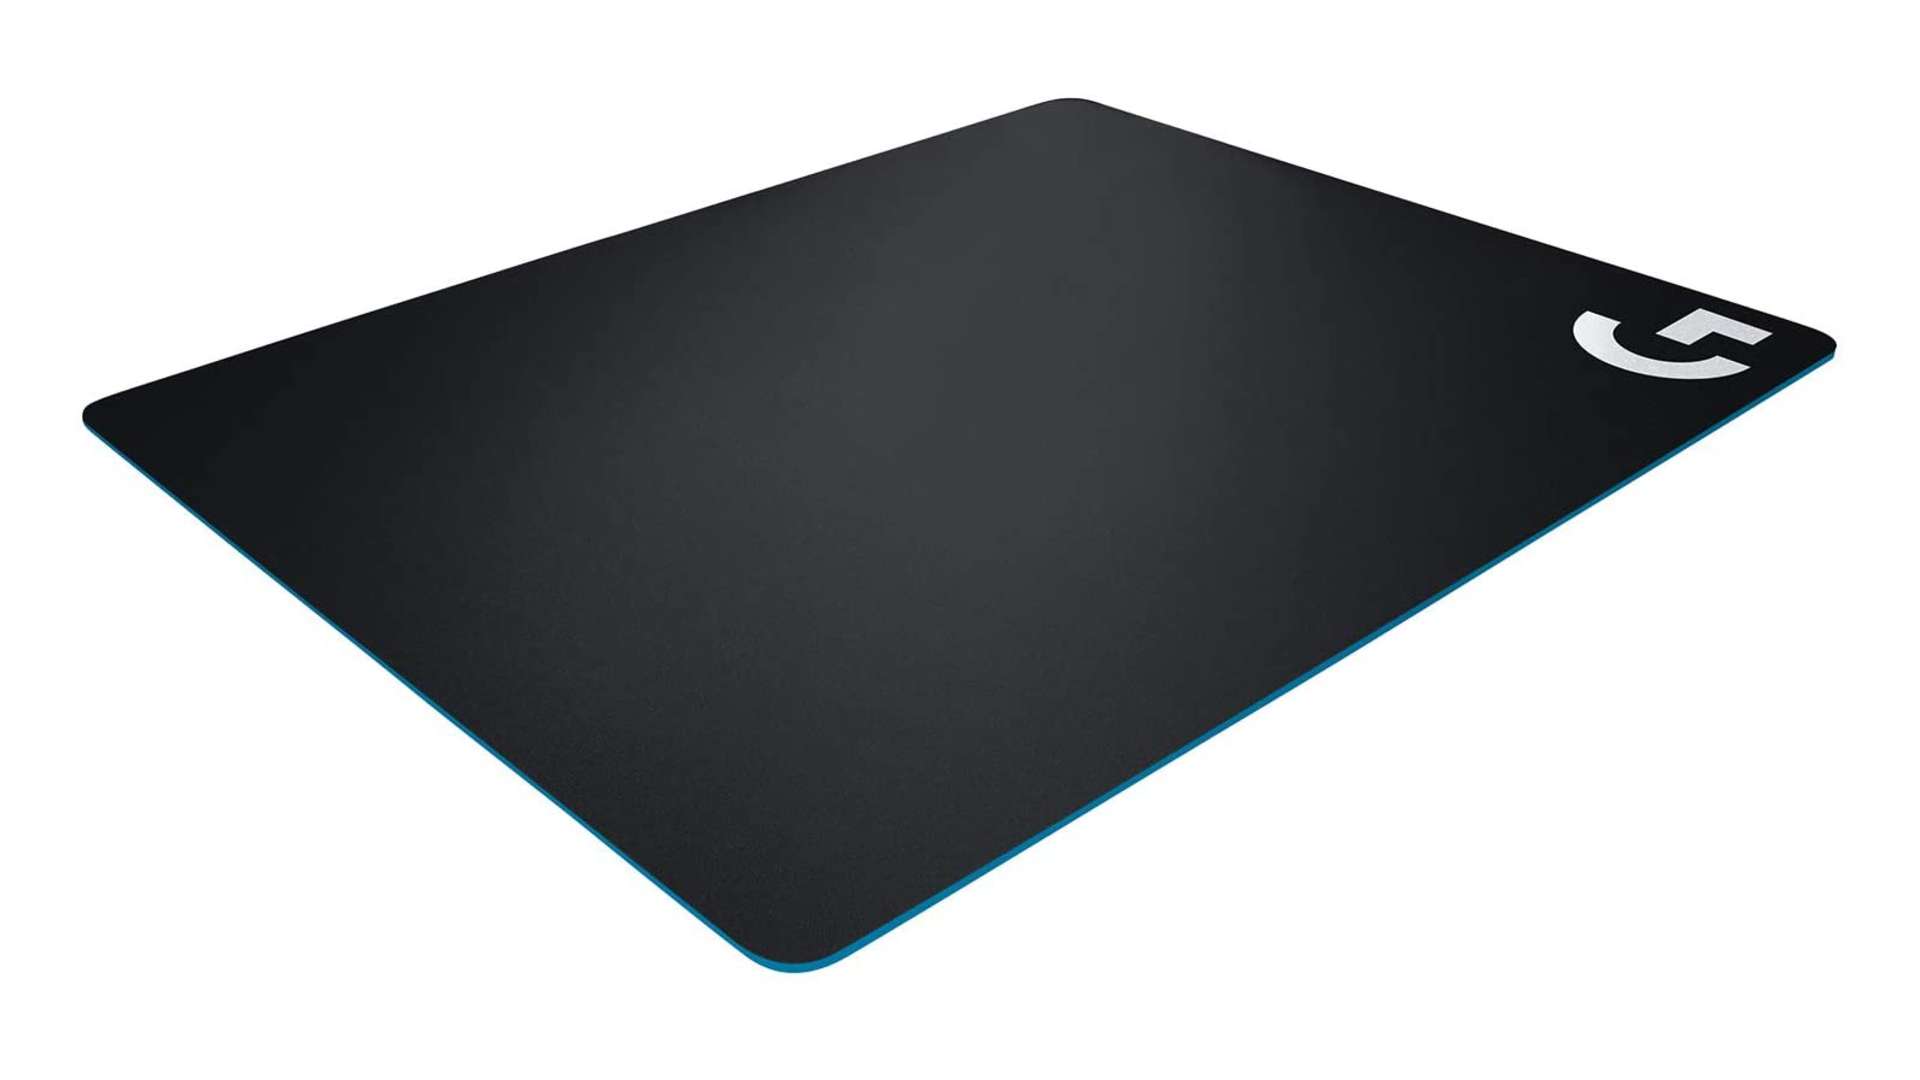 Black Logitech G440 mouse pad on a white background